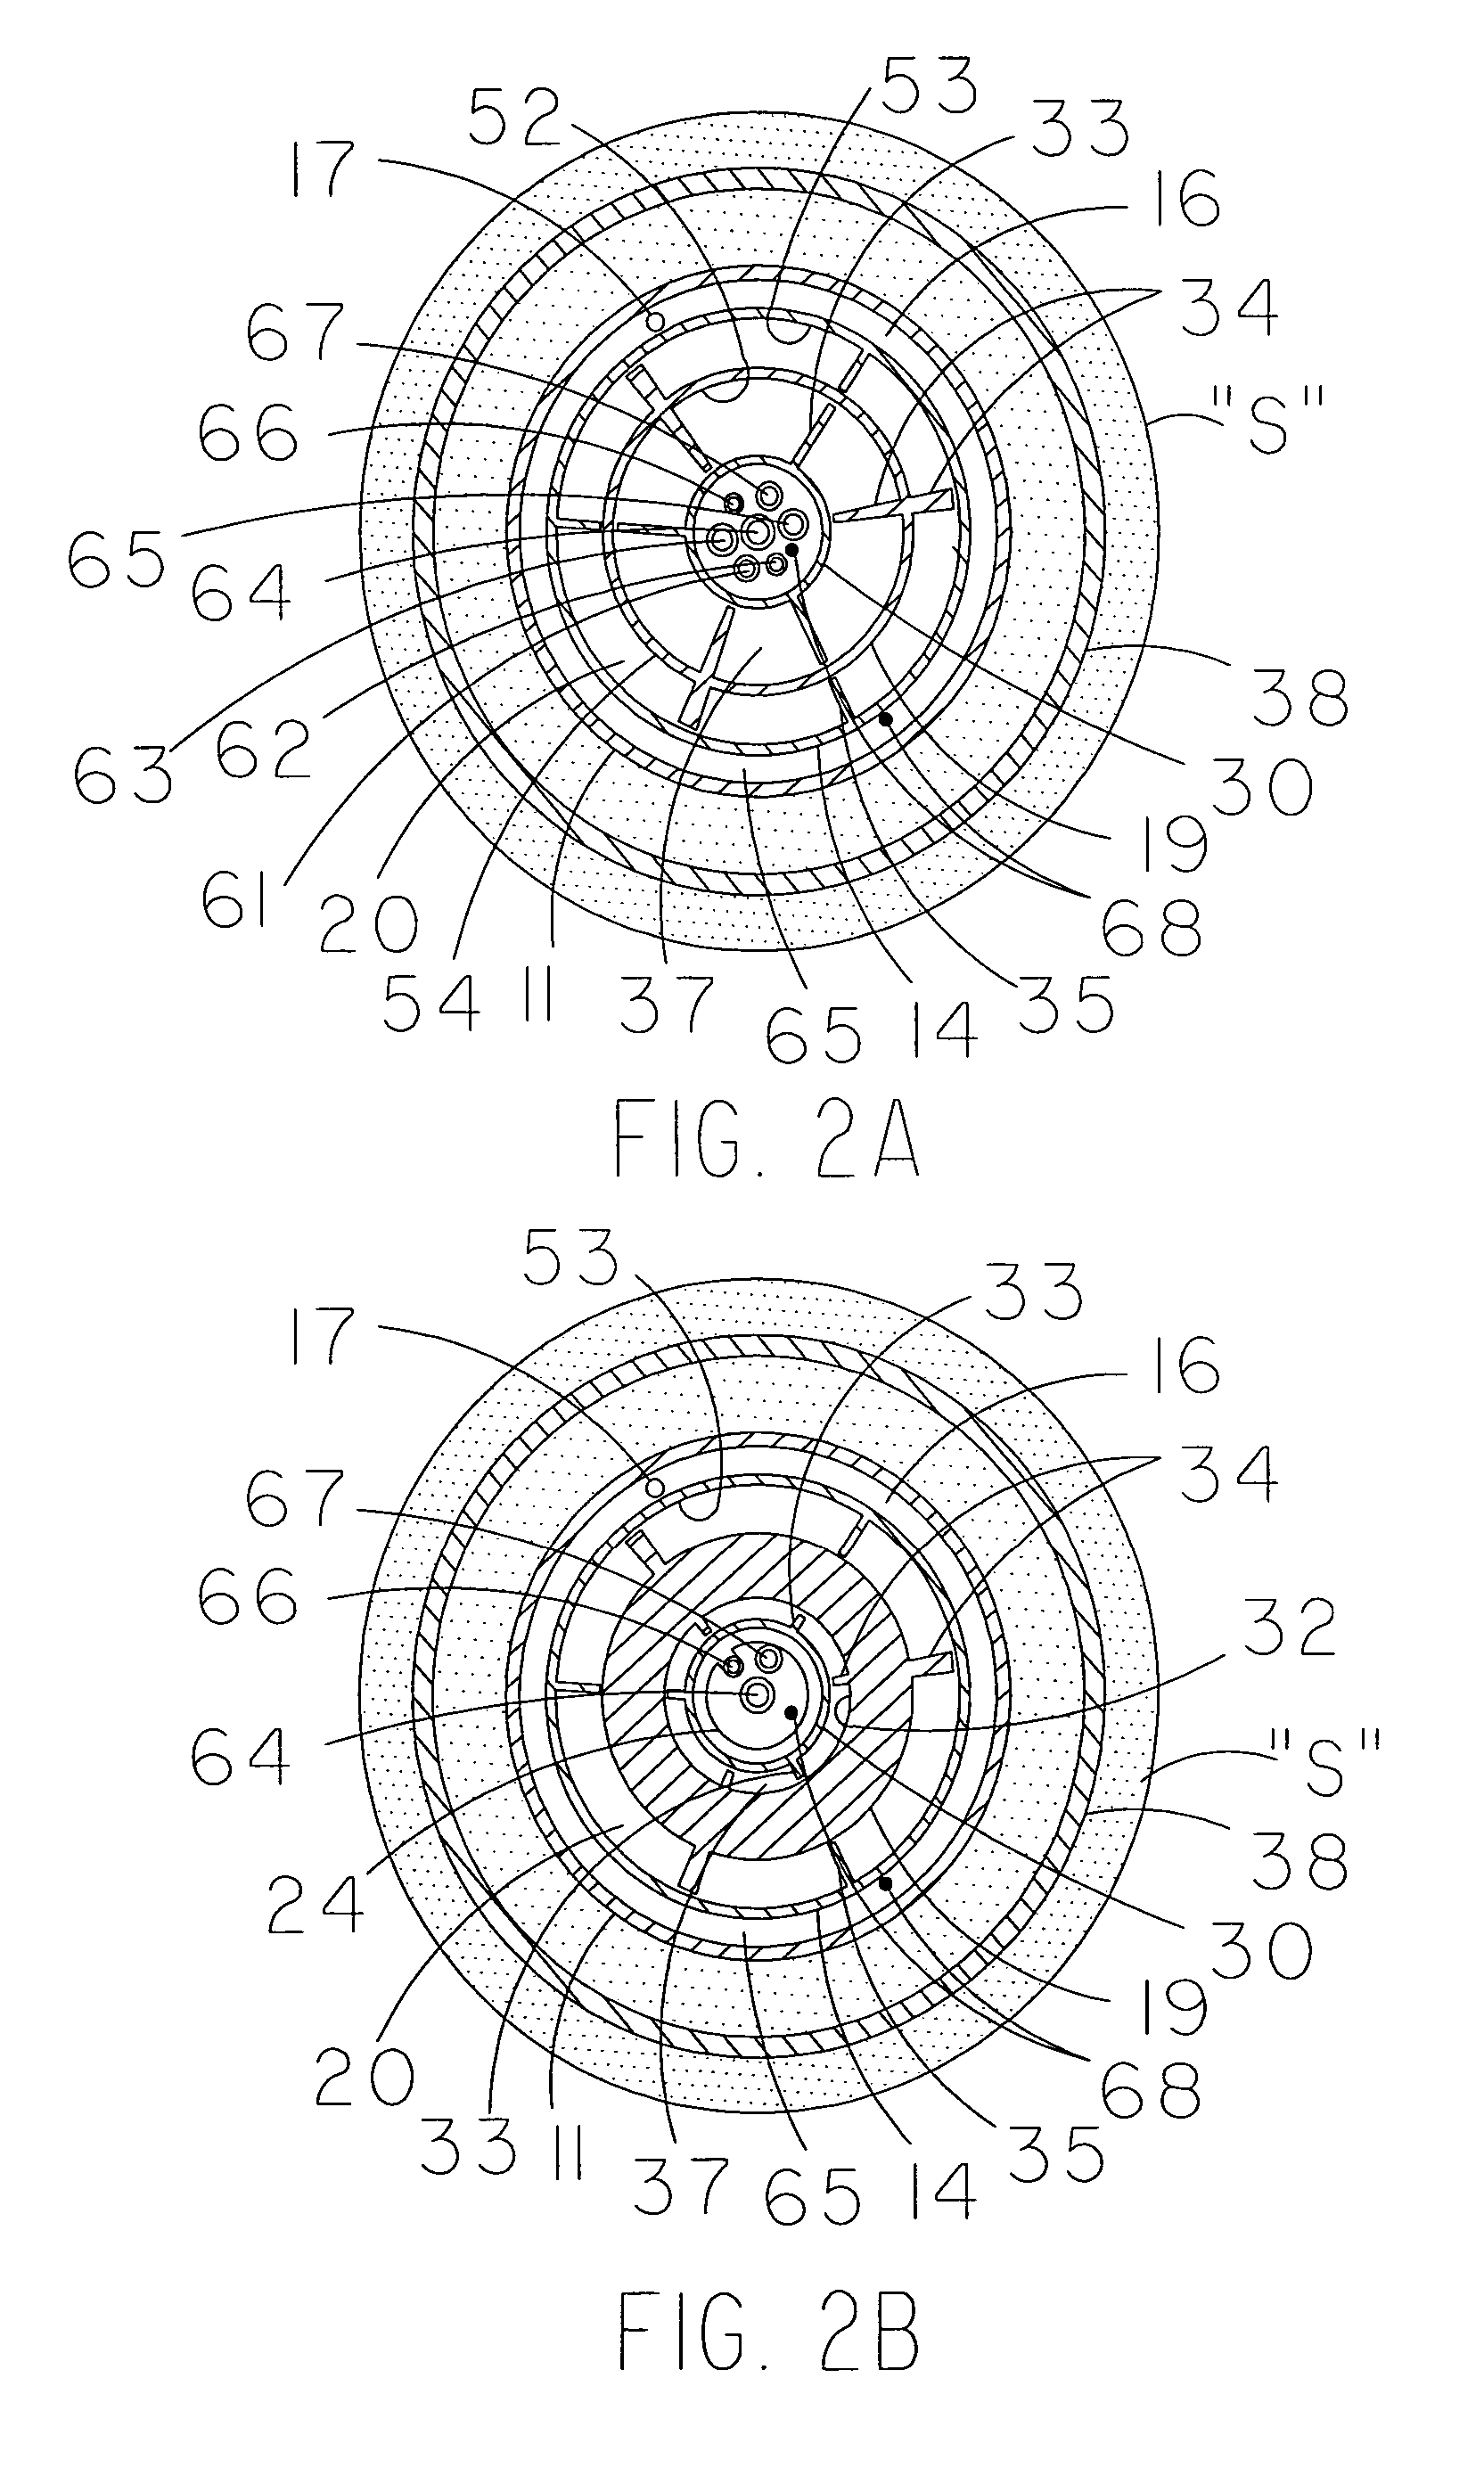 Gravity pressure vessel and related apparatus and methods